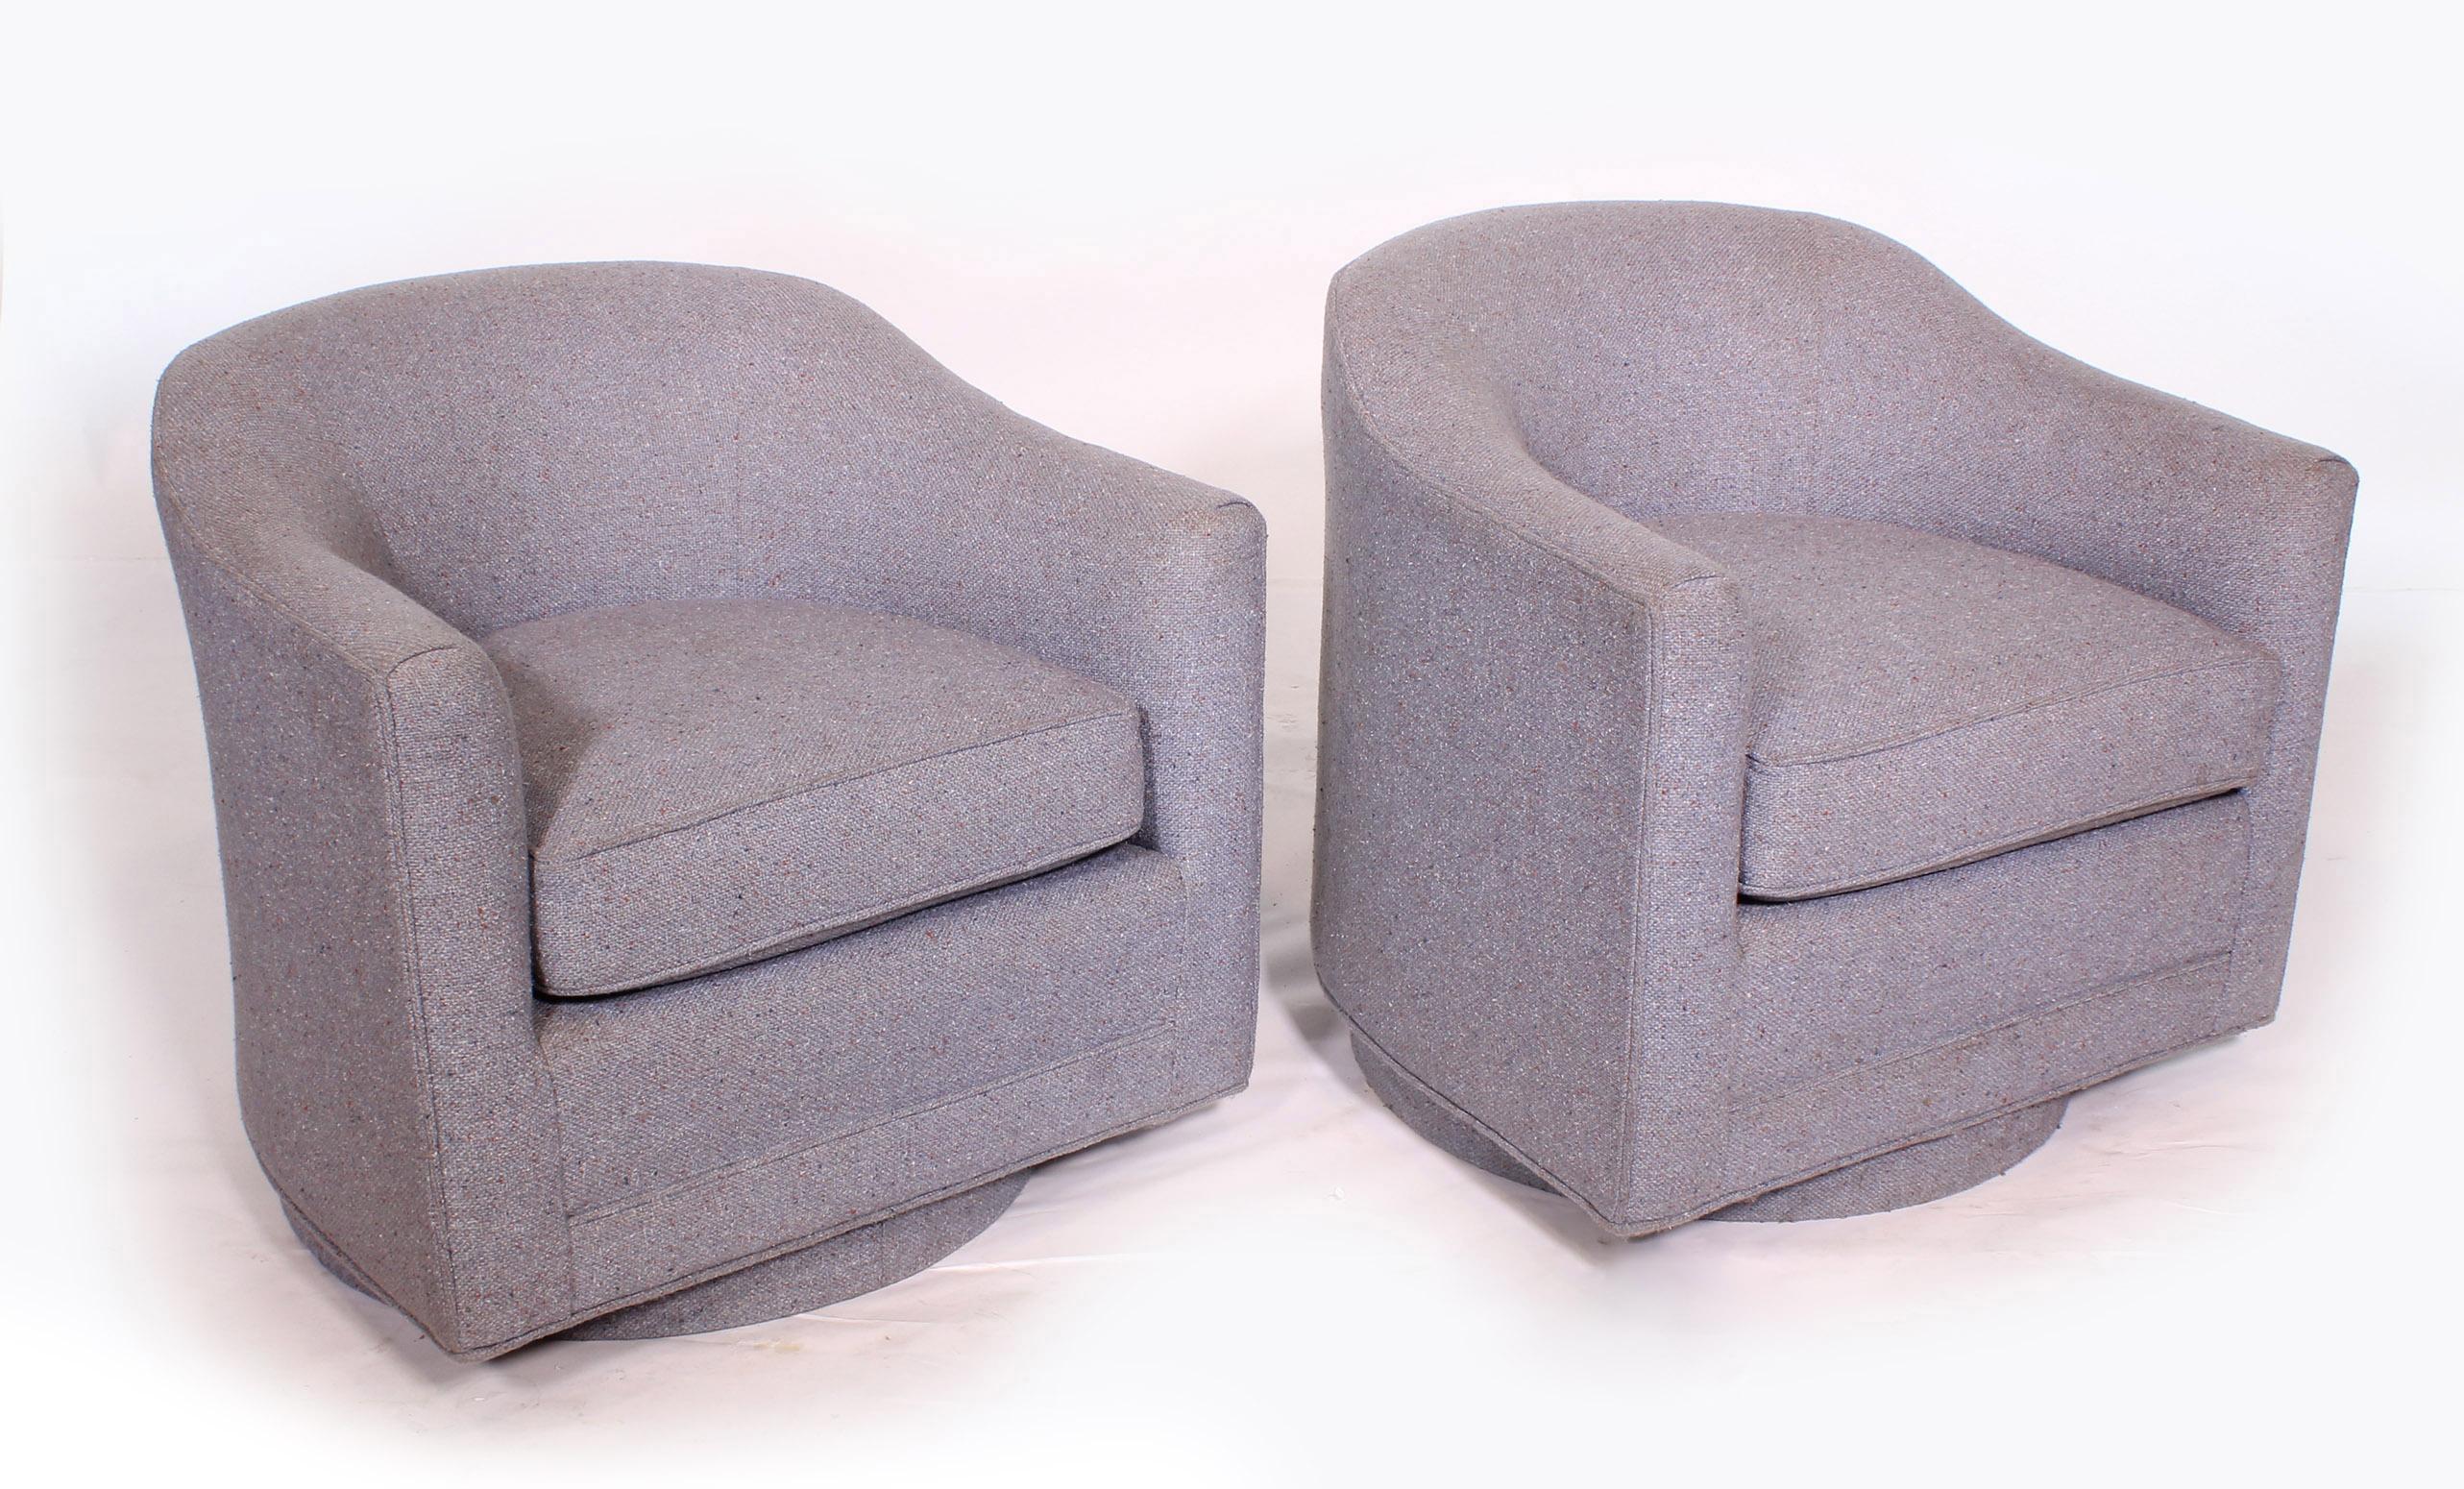 Pair of vintage Mid-Century Modern barrel/tub swivel chairs in the style of Thayer Coggin - Milo Baughman. Chairs were used in the waiting room at the Philip Morris company. Original label has been replaced as chairs have been reupholstered. Some